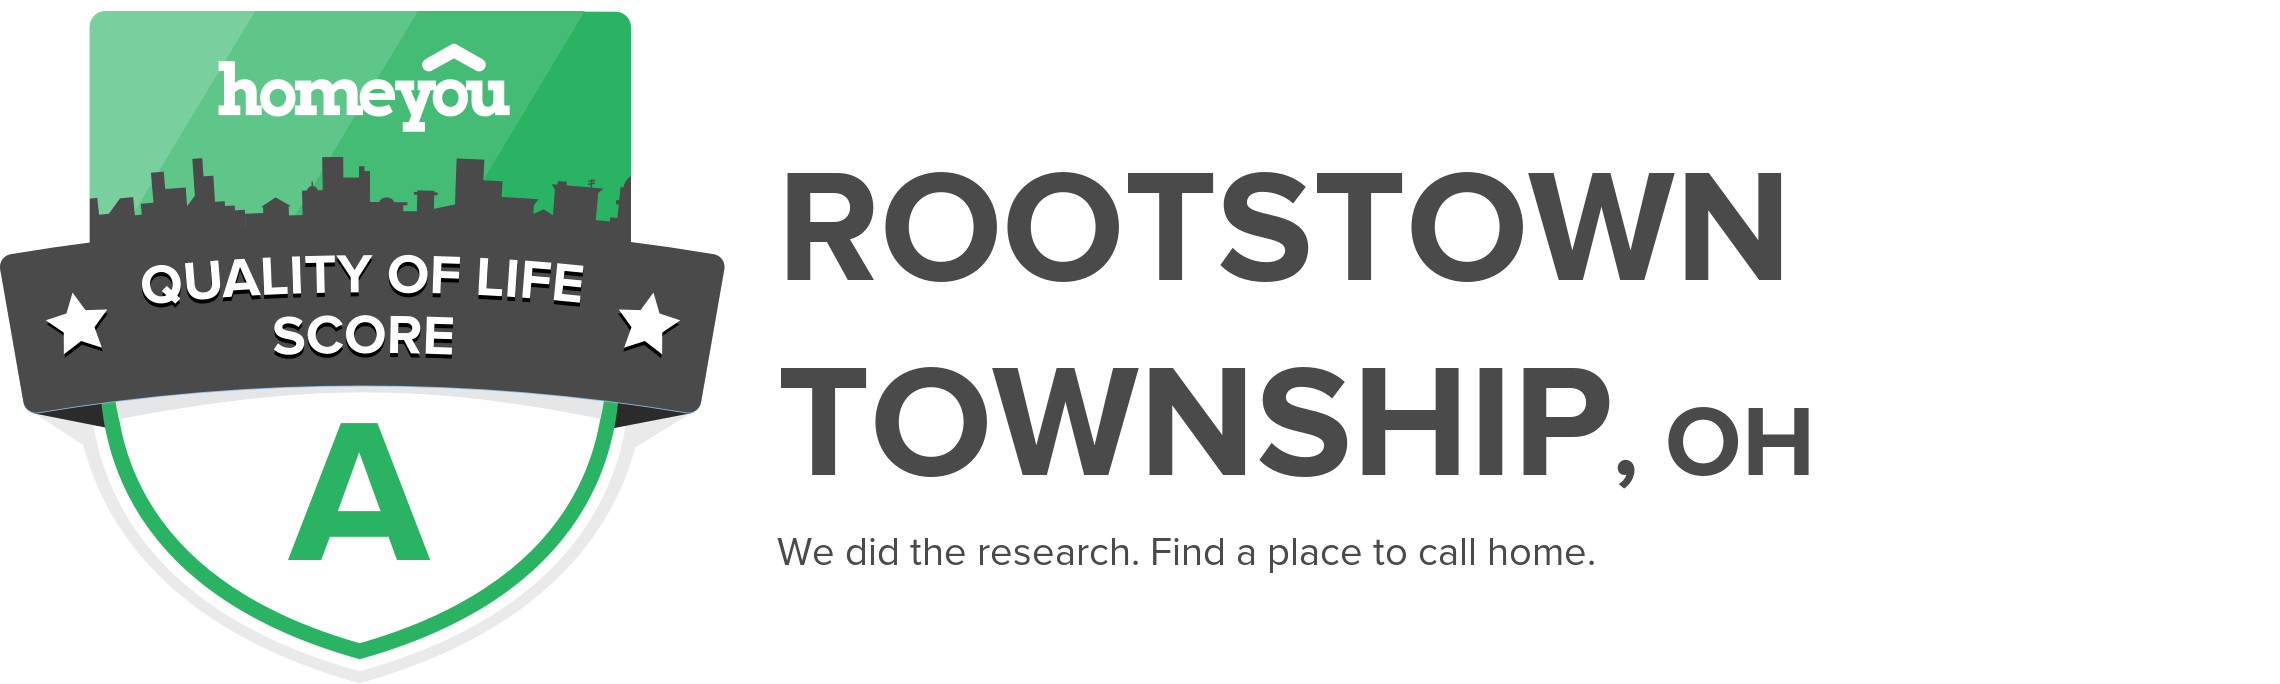 Rootstown township, OH